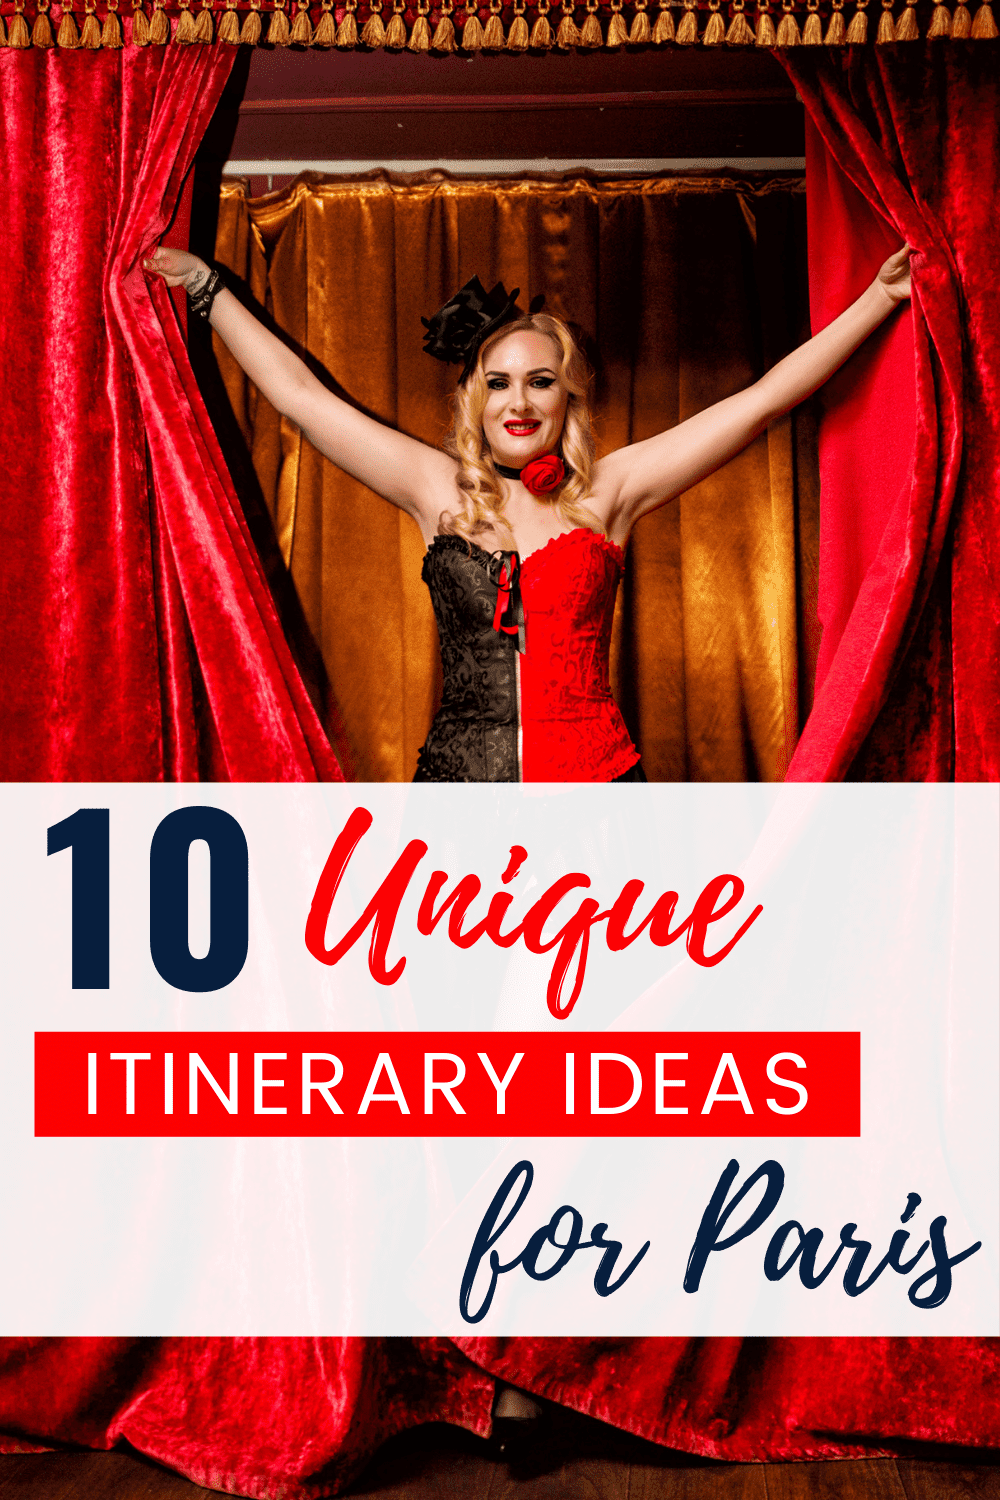 Woman holding apart two stage curtains. Text overlay says "10 unique itinerary ideas for Paris"